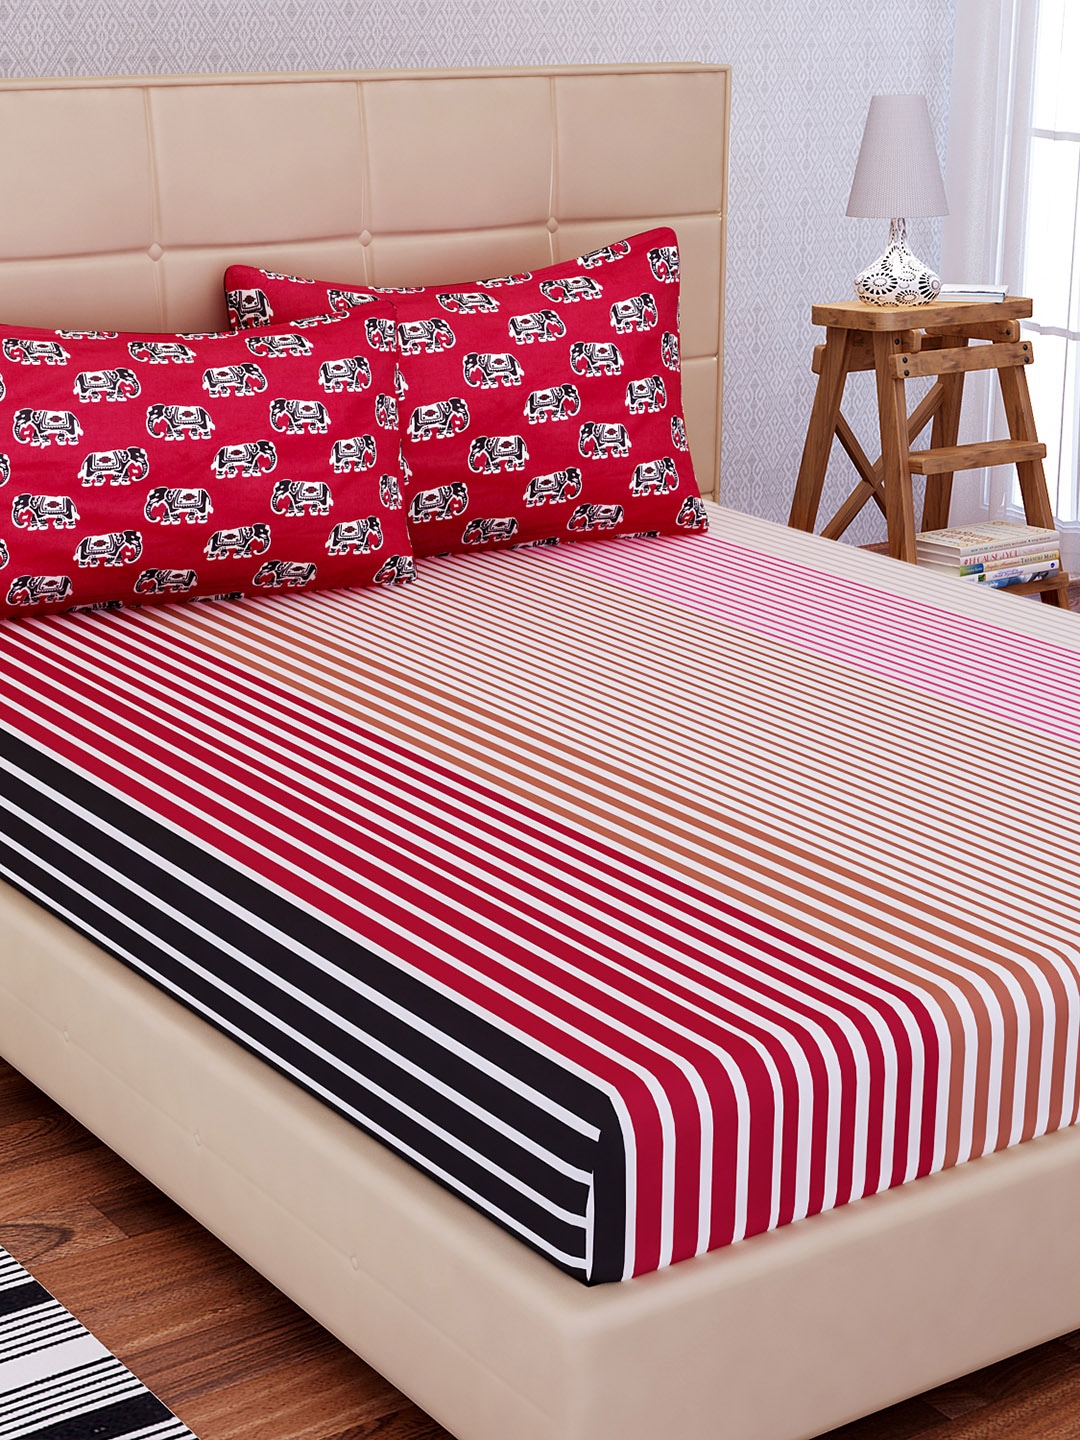 SEJ by Nisha Gupta Red & Brown Flat 144 TC Cotton 1 Double Bedsheet with 2 Pillow Covers Price in India